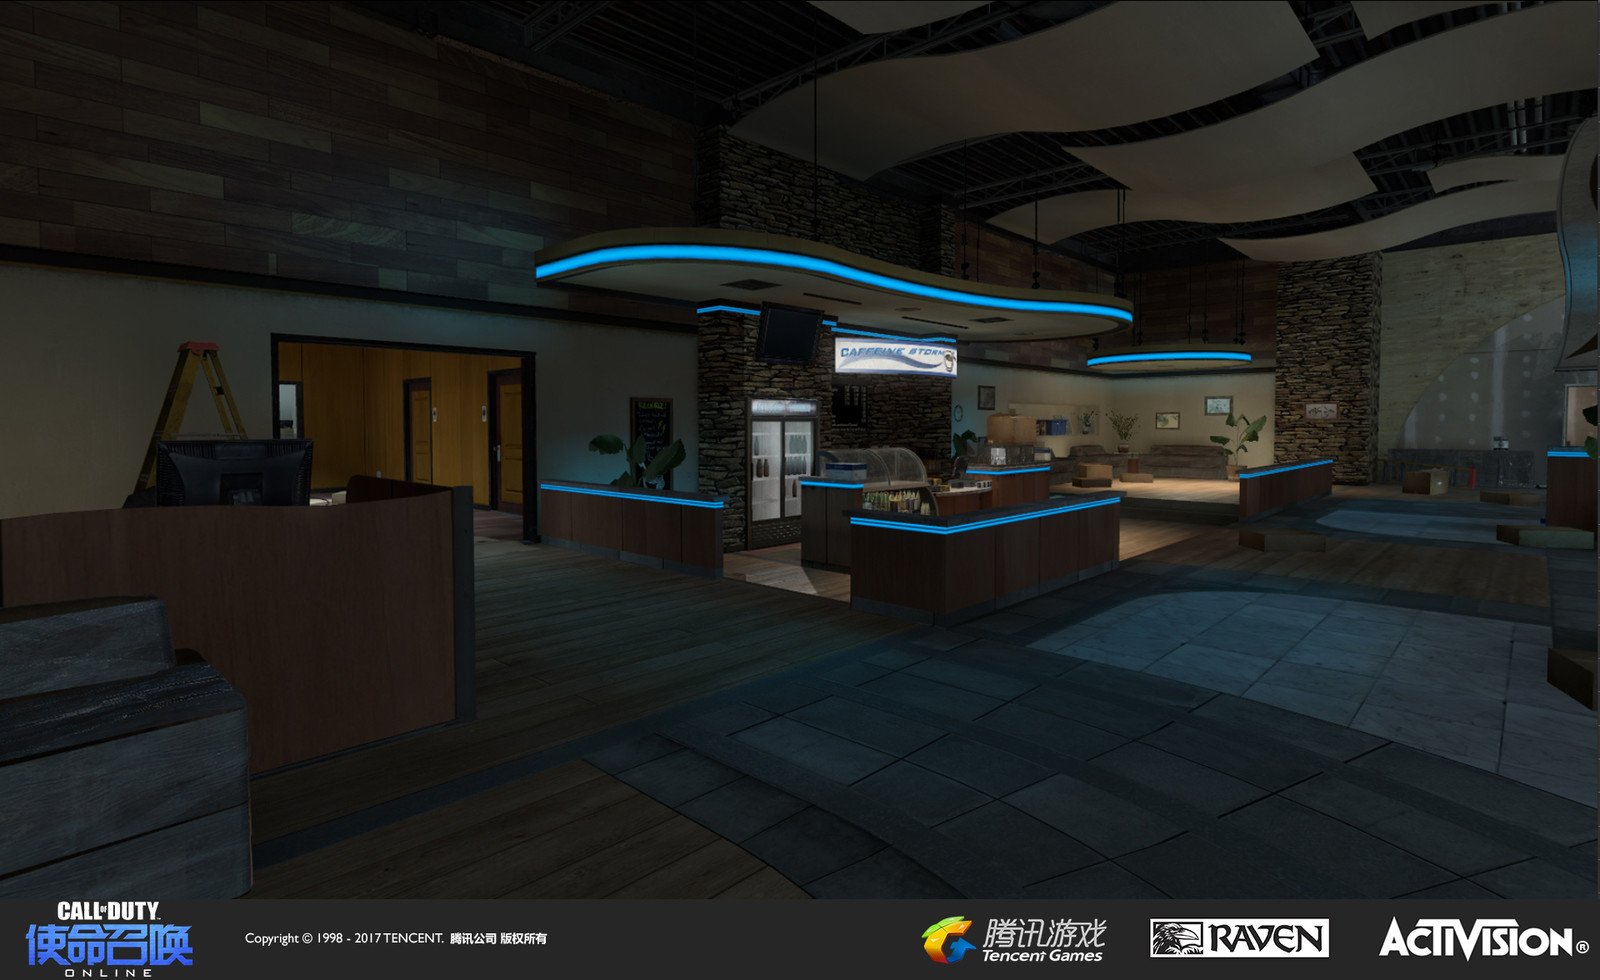 The main interior space where most of the combat takes place. I designed the re-themed look, created the new coffee shop branding and signage, added ceiling decorative models, reworked the geo, and added illuminated strips. 